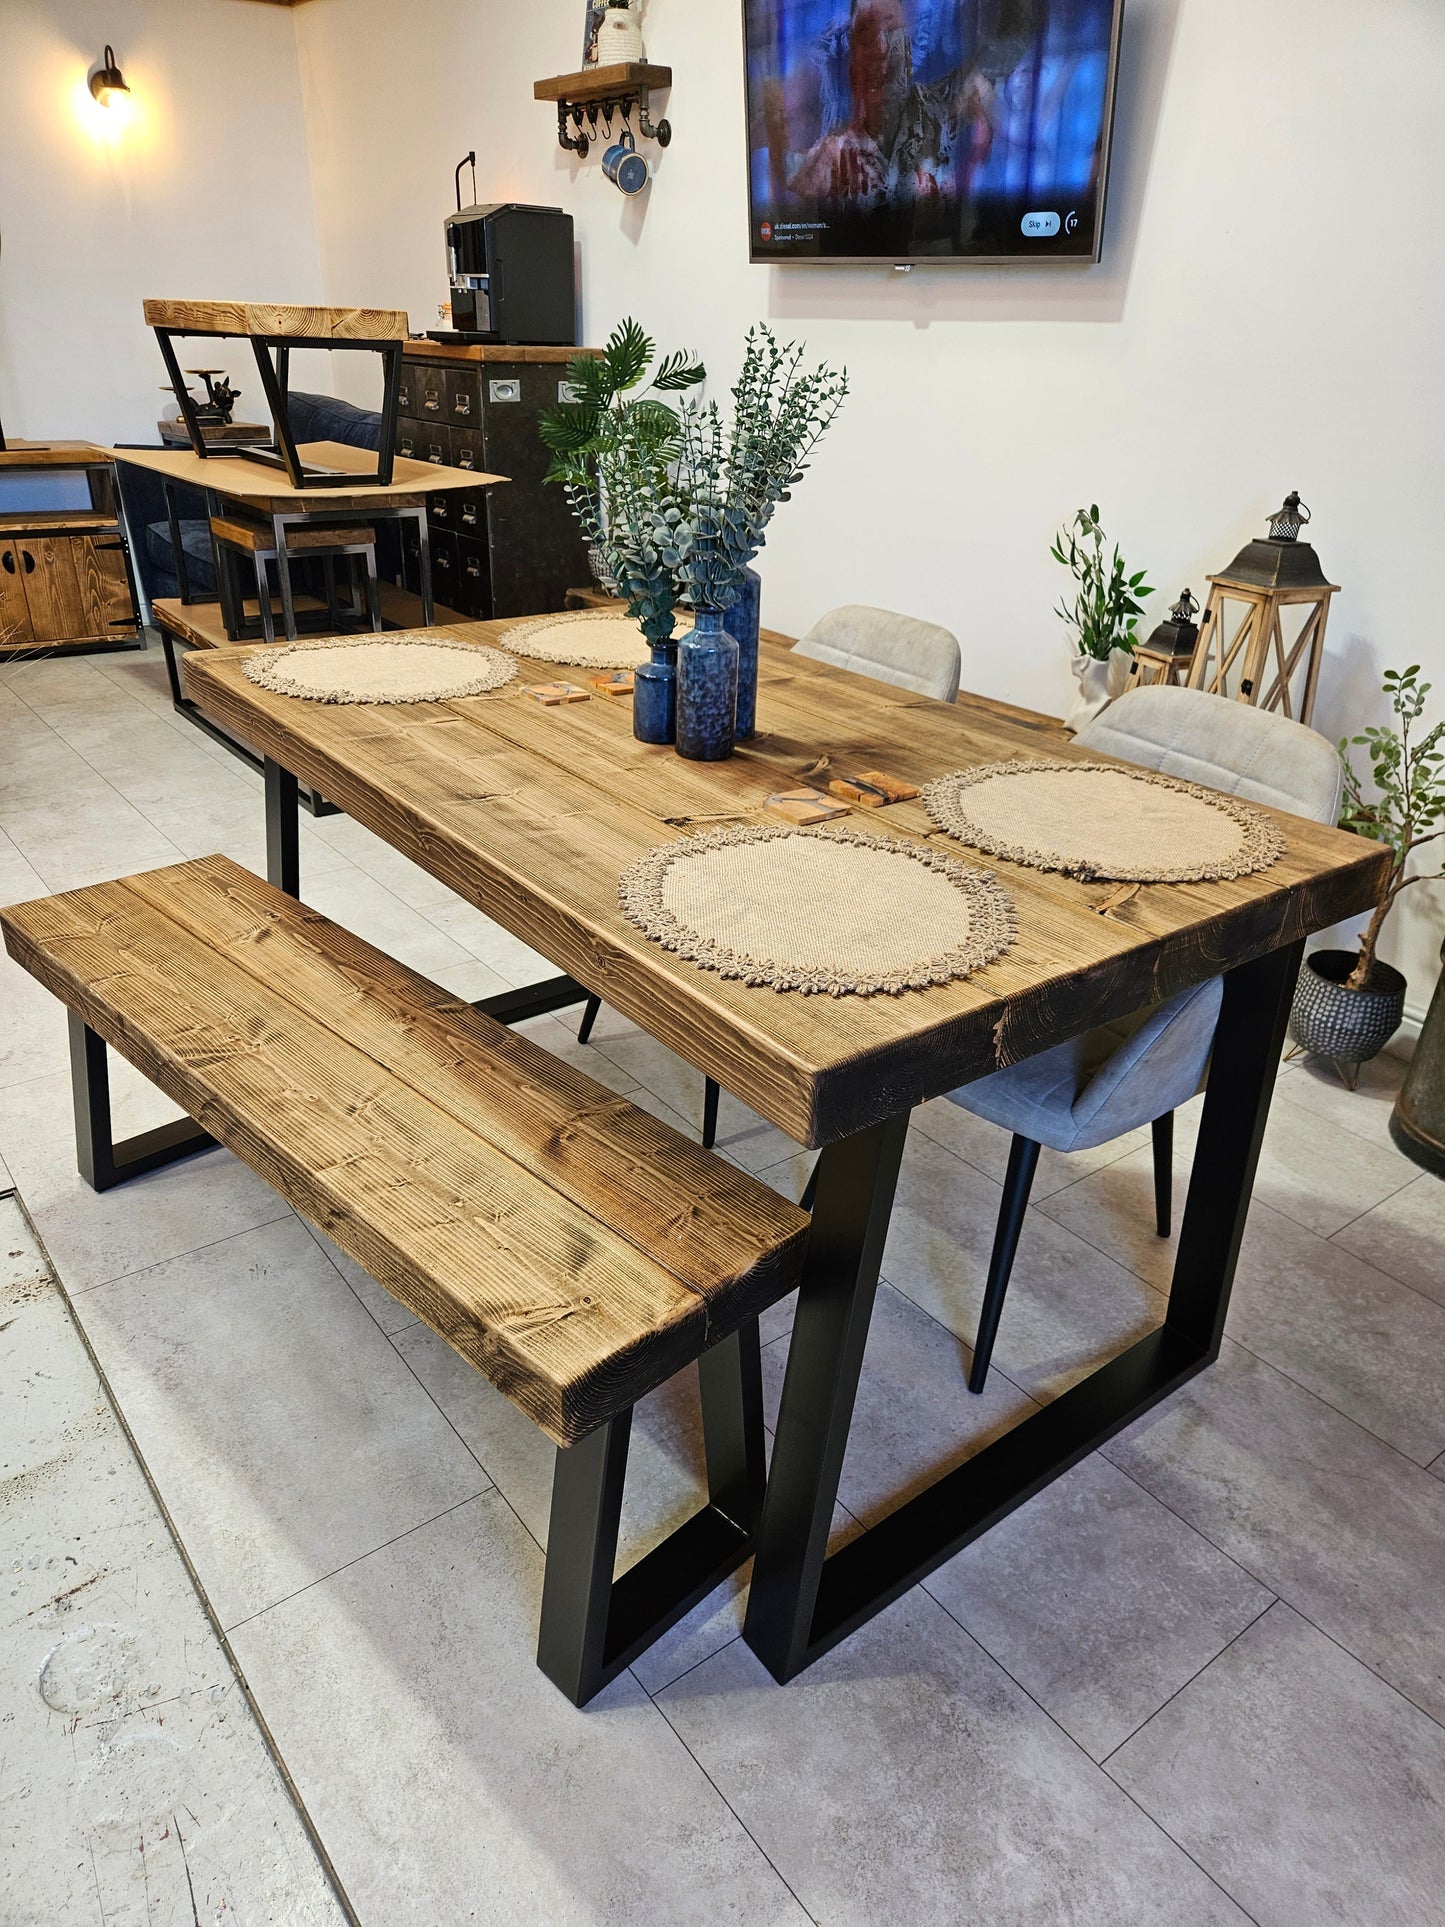 Dining table with bench and 2 chairs